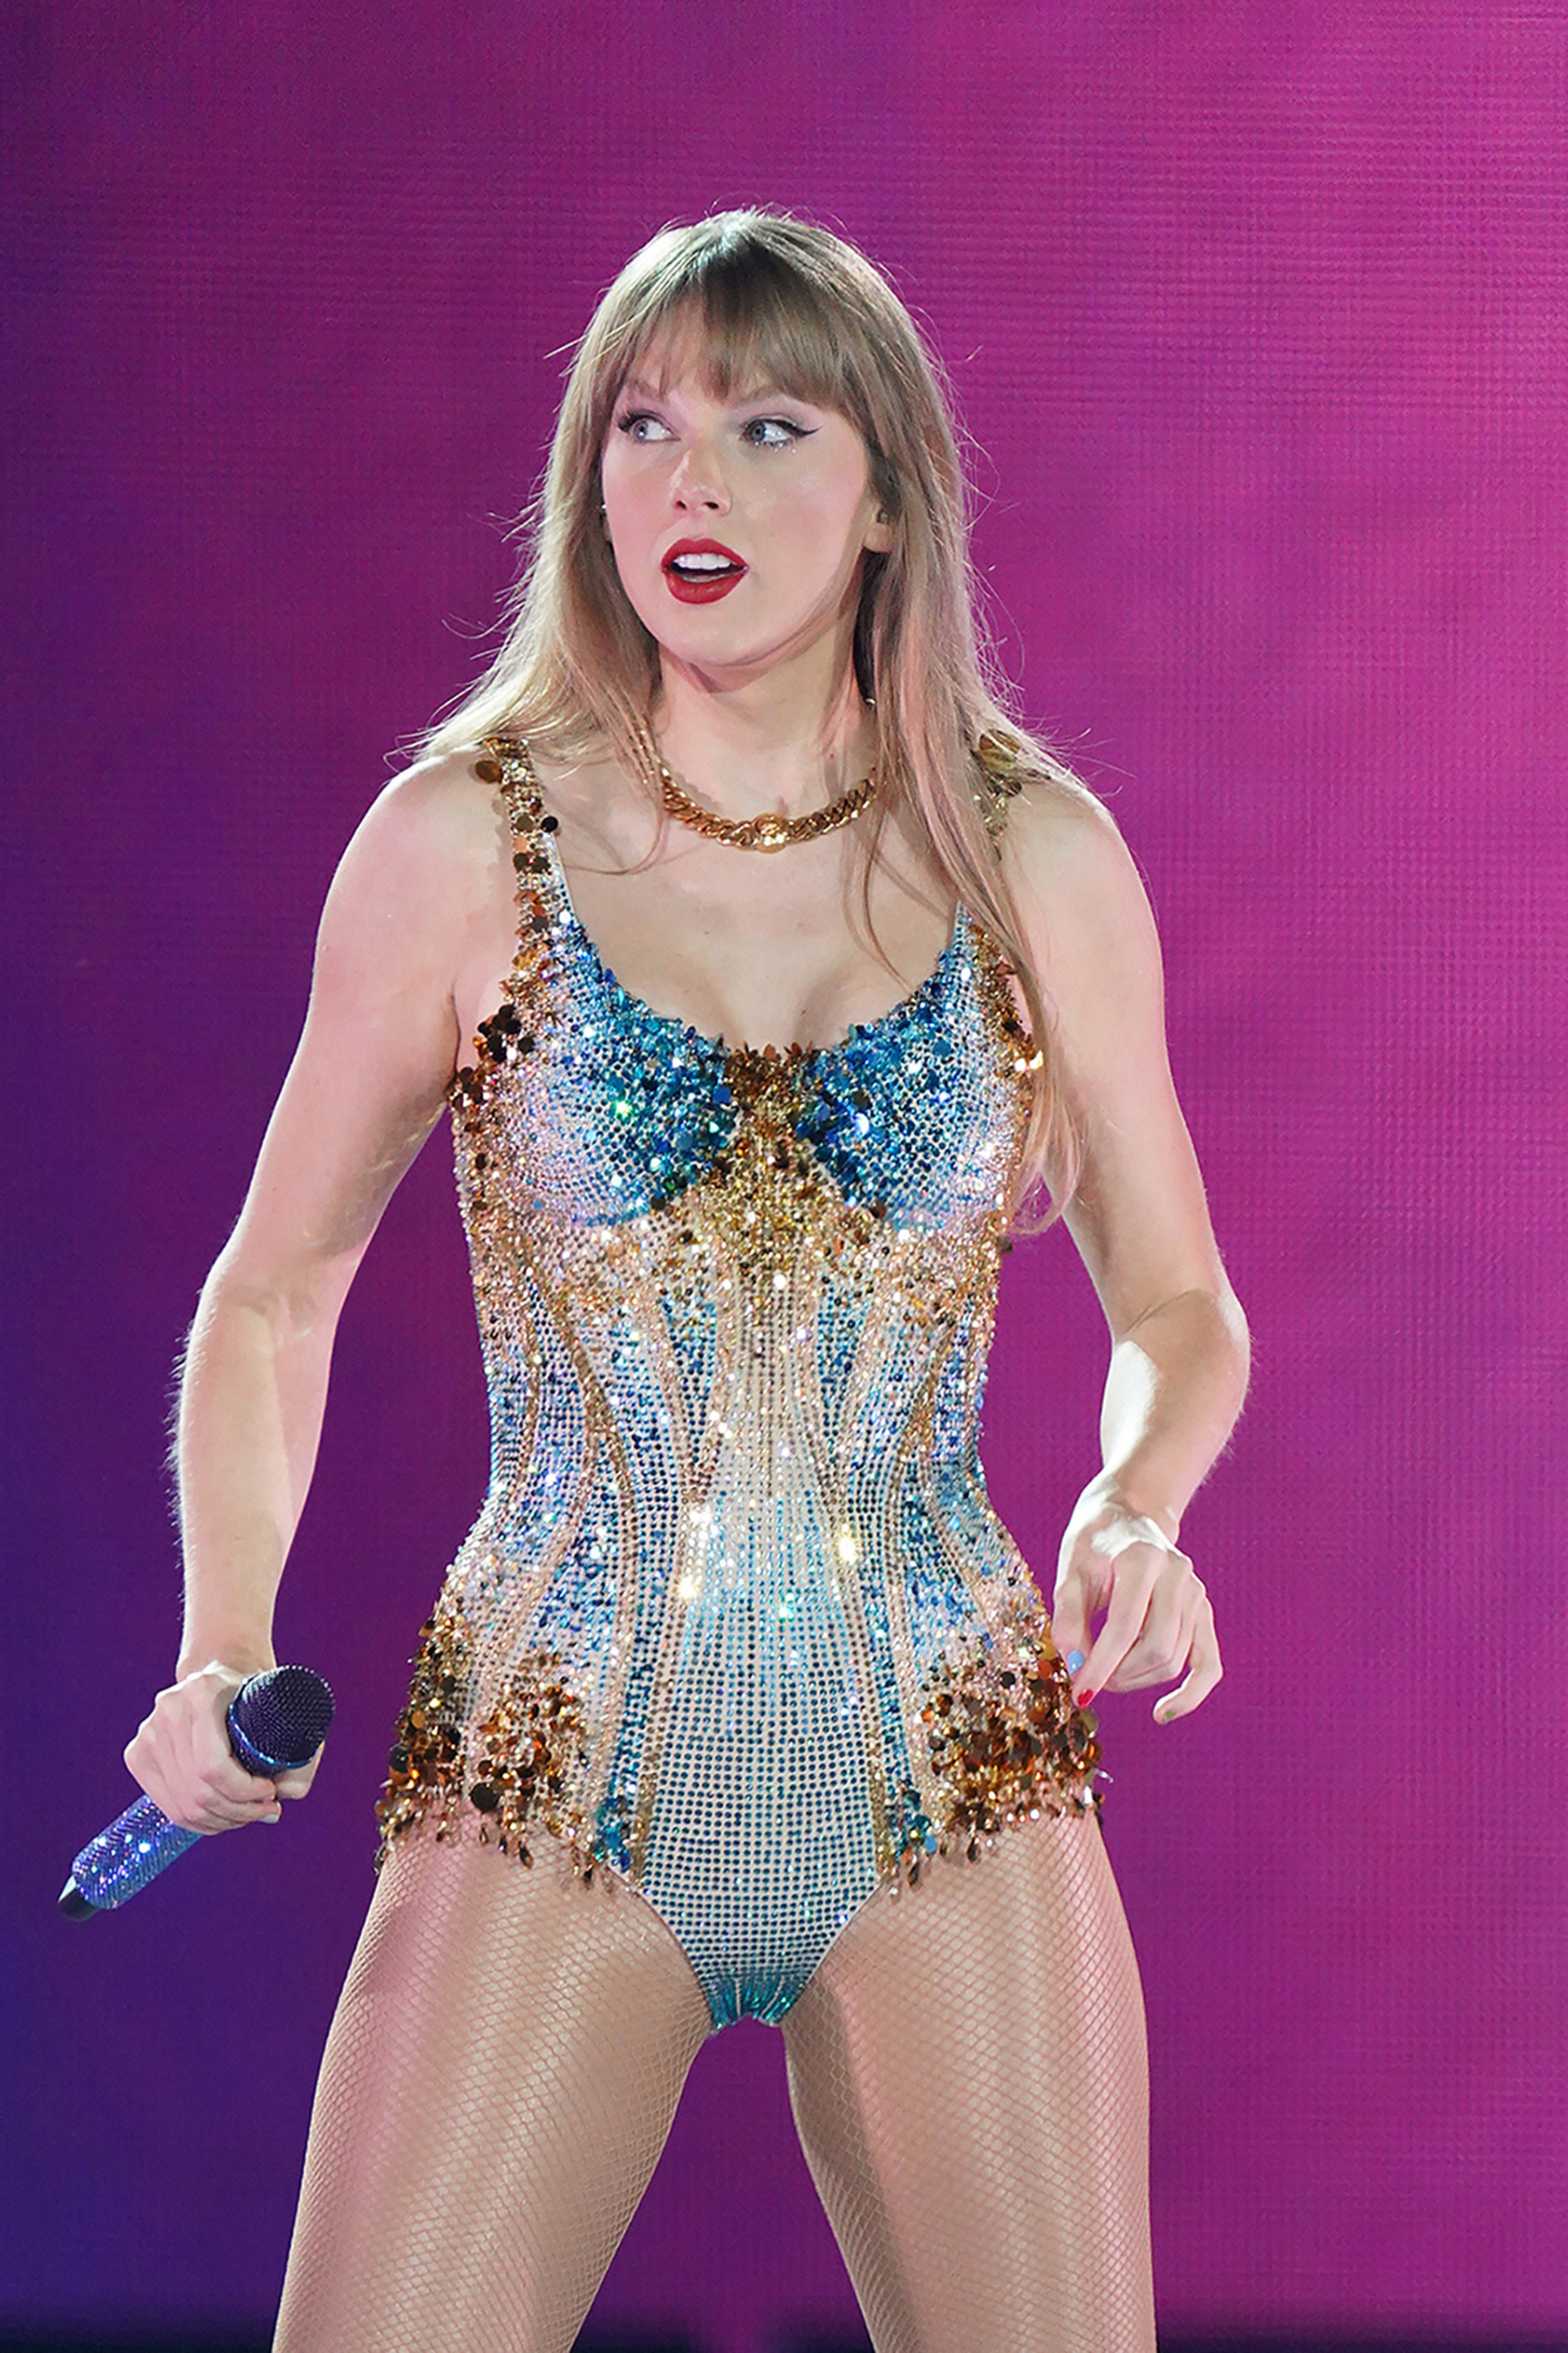 Taylor onstage in a bodysuit